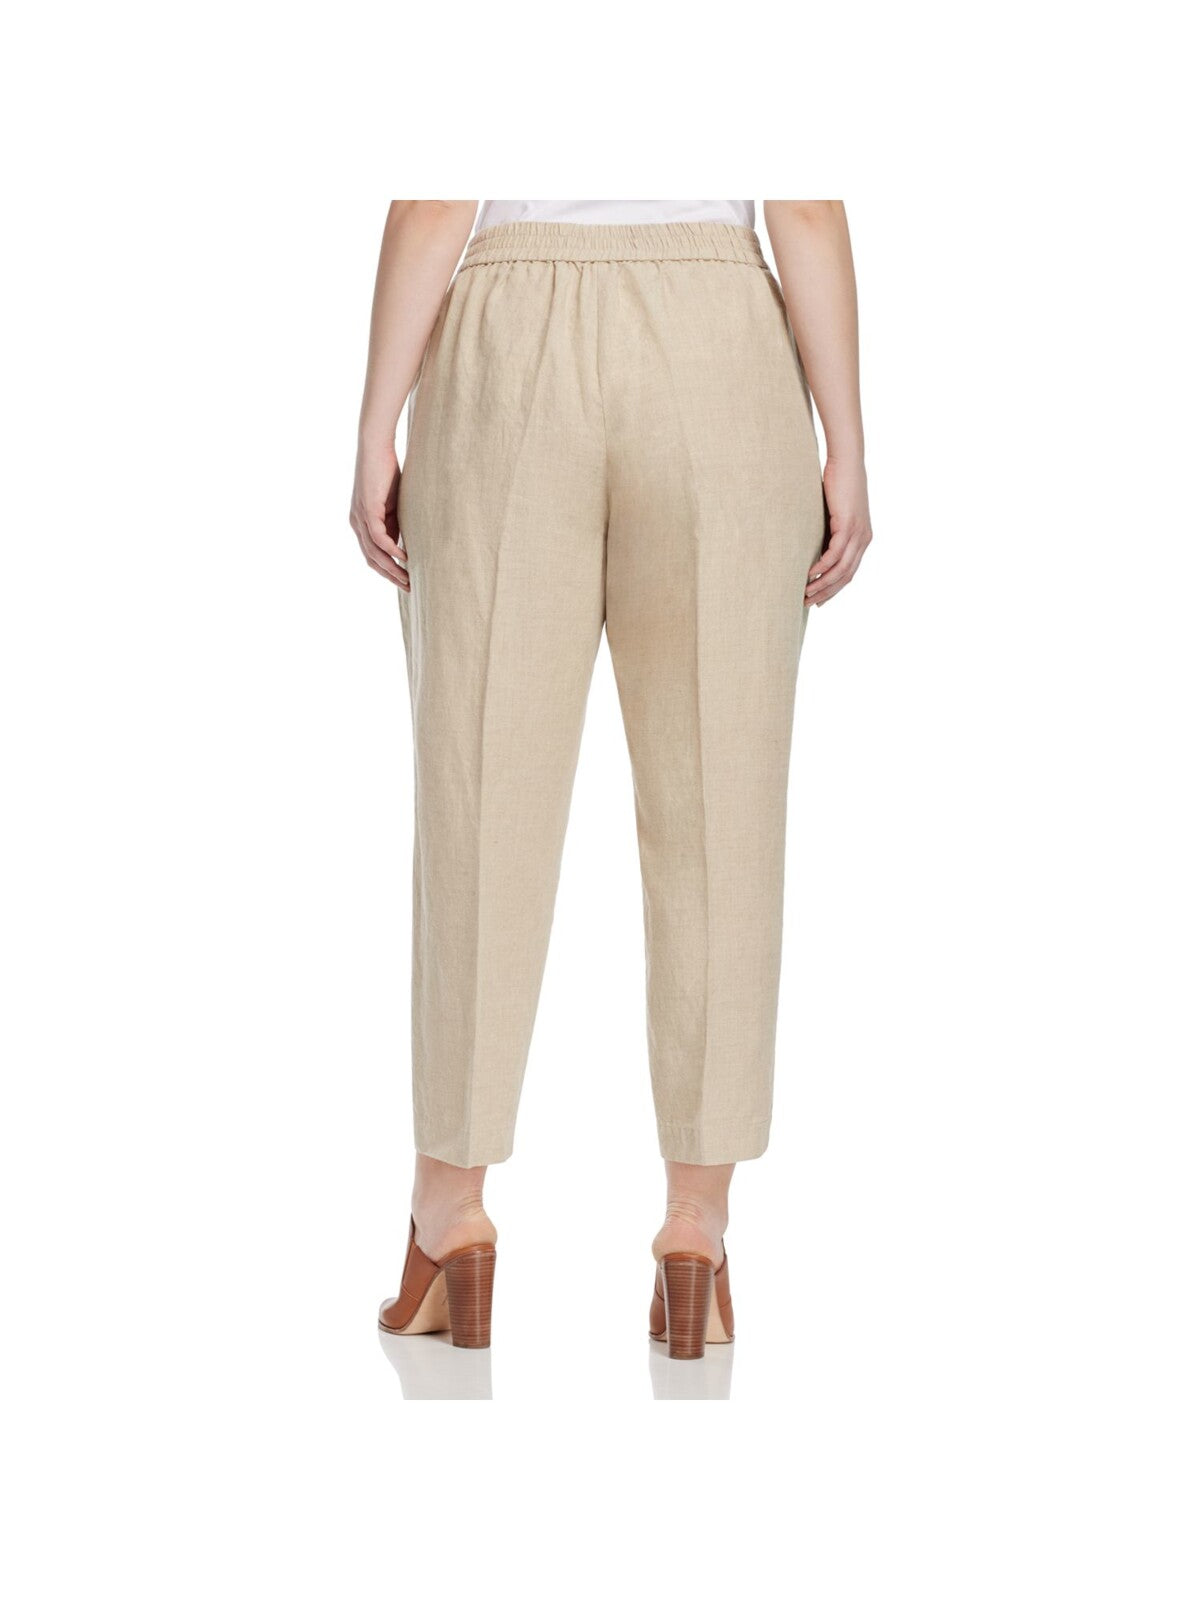 EILEEN FISHER Womens Beige Stretch Darted Tapered Ankle Pants Plus 2X